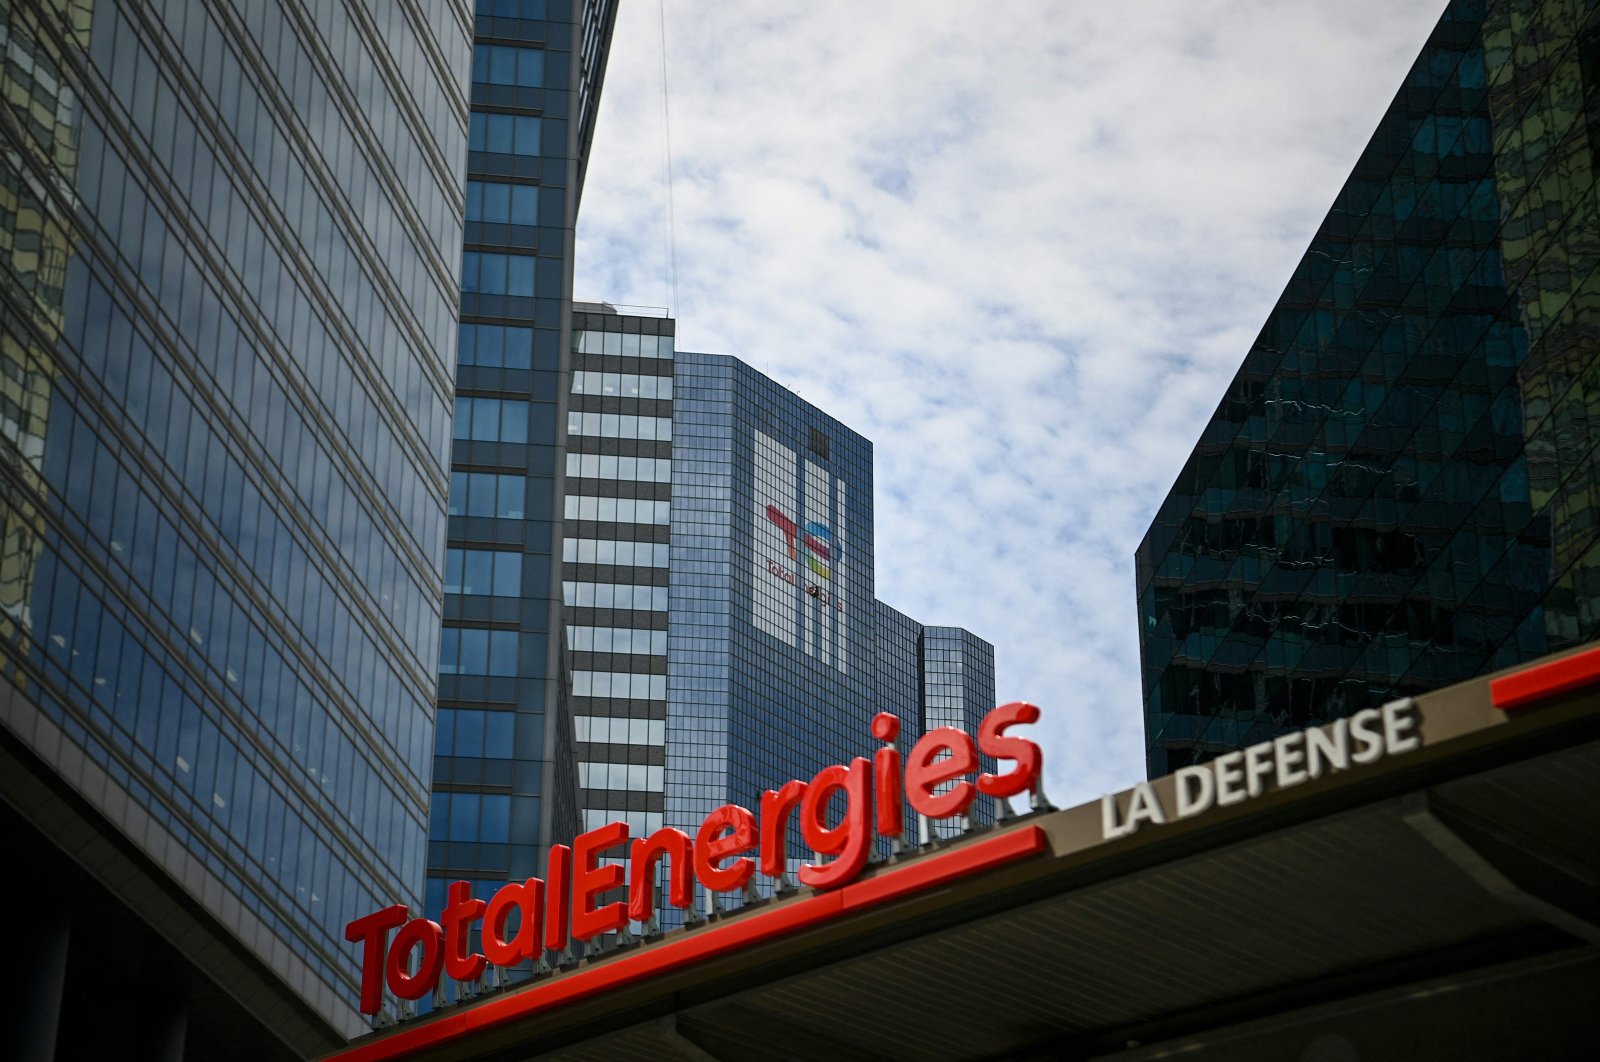 The new TotalEnergies logo during its unveiling ceremony, at a charging station in La Defense on the outskirts of Paris, France, May 28, 2021. (AFP Photo)